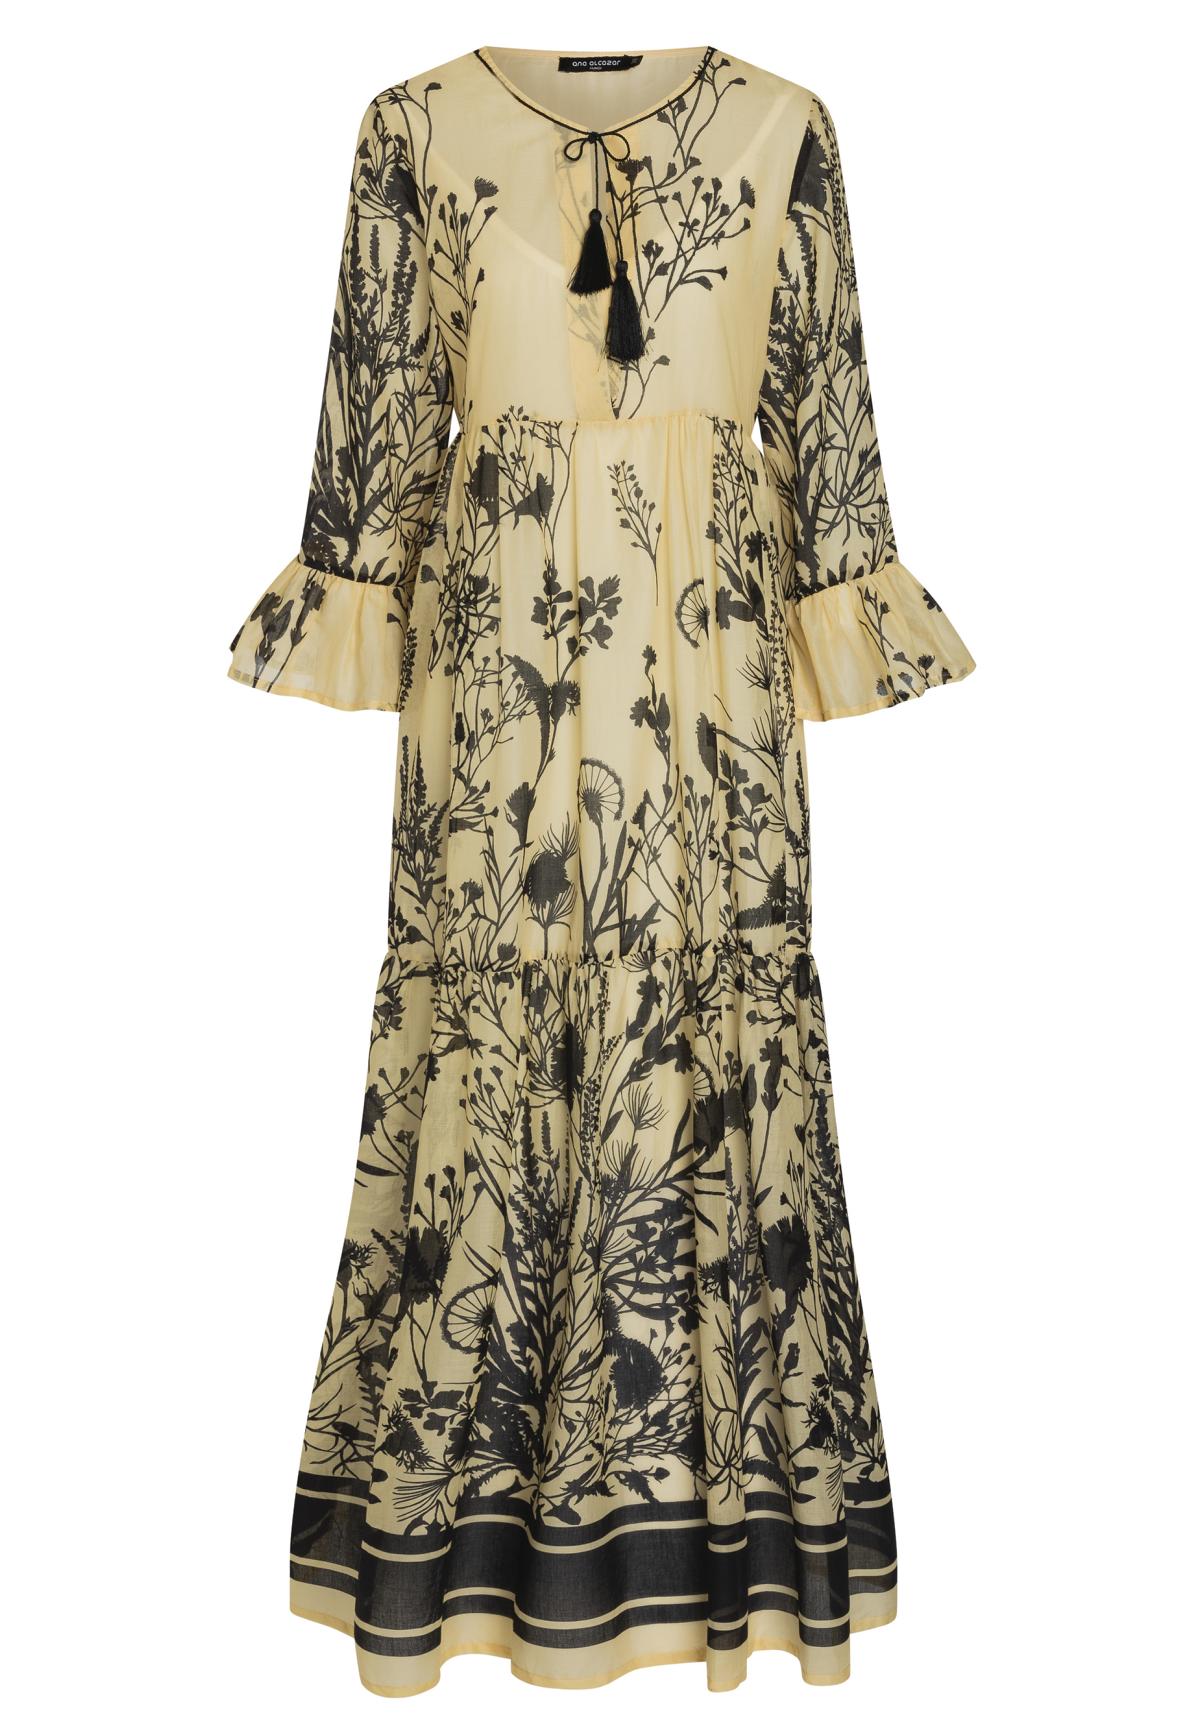 Boho-style dress in maxi-length with flower print in beige and ...